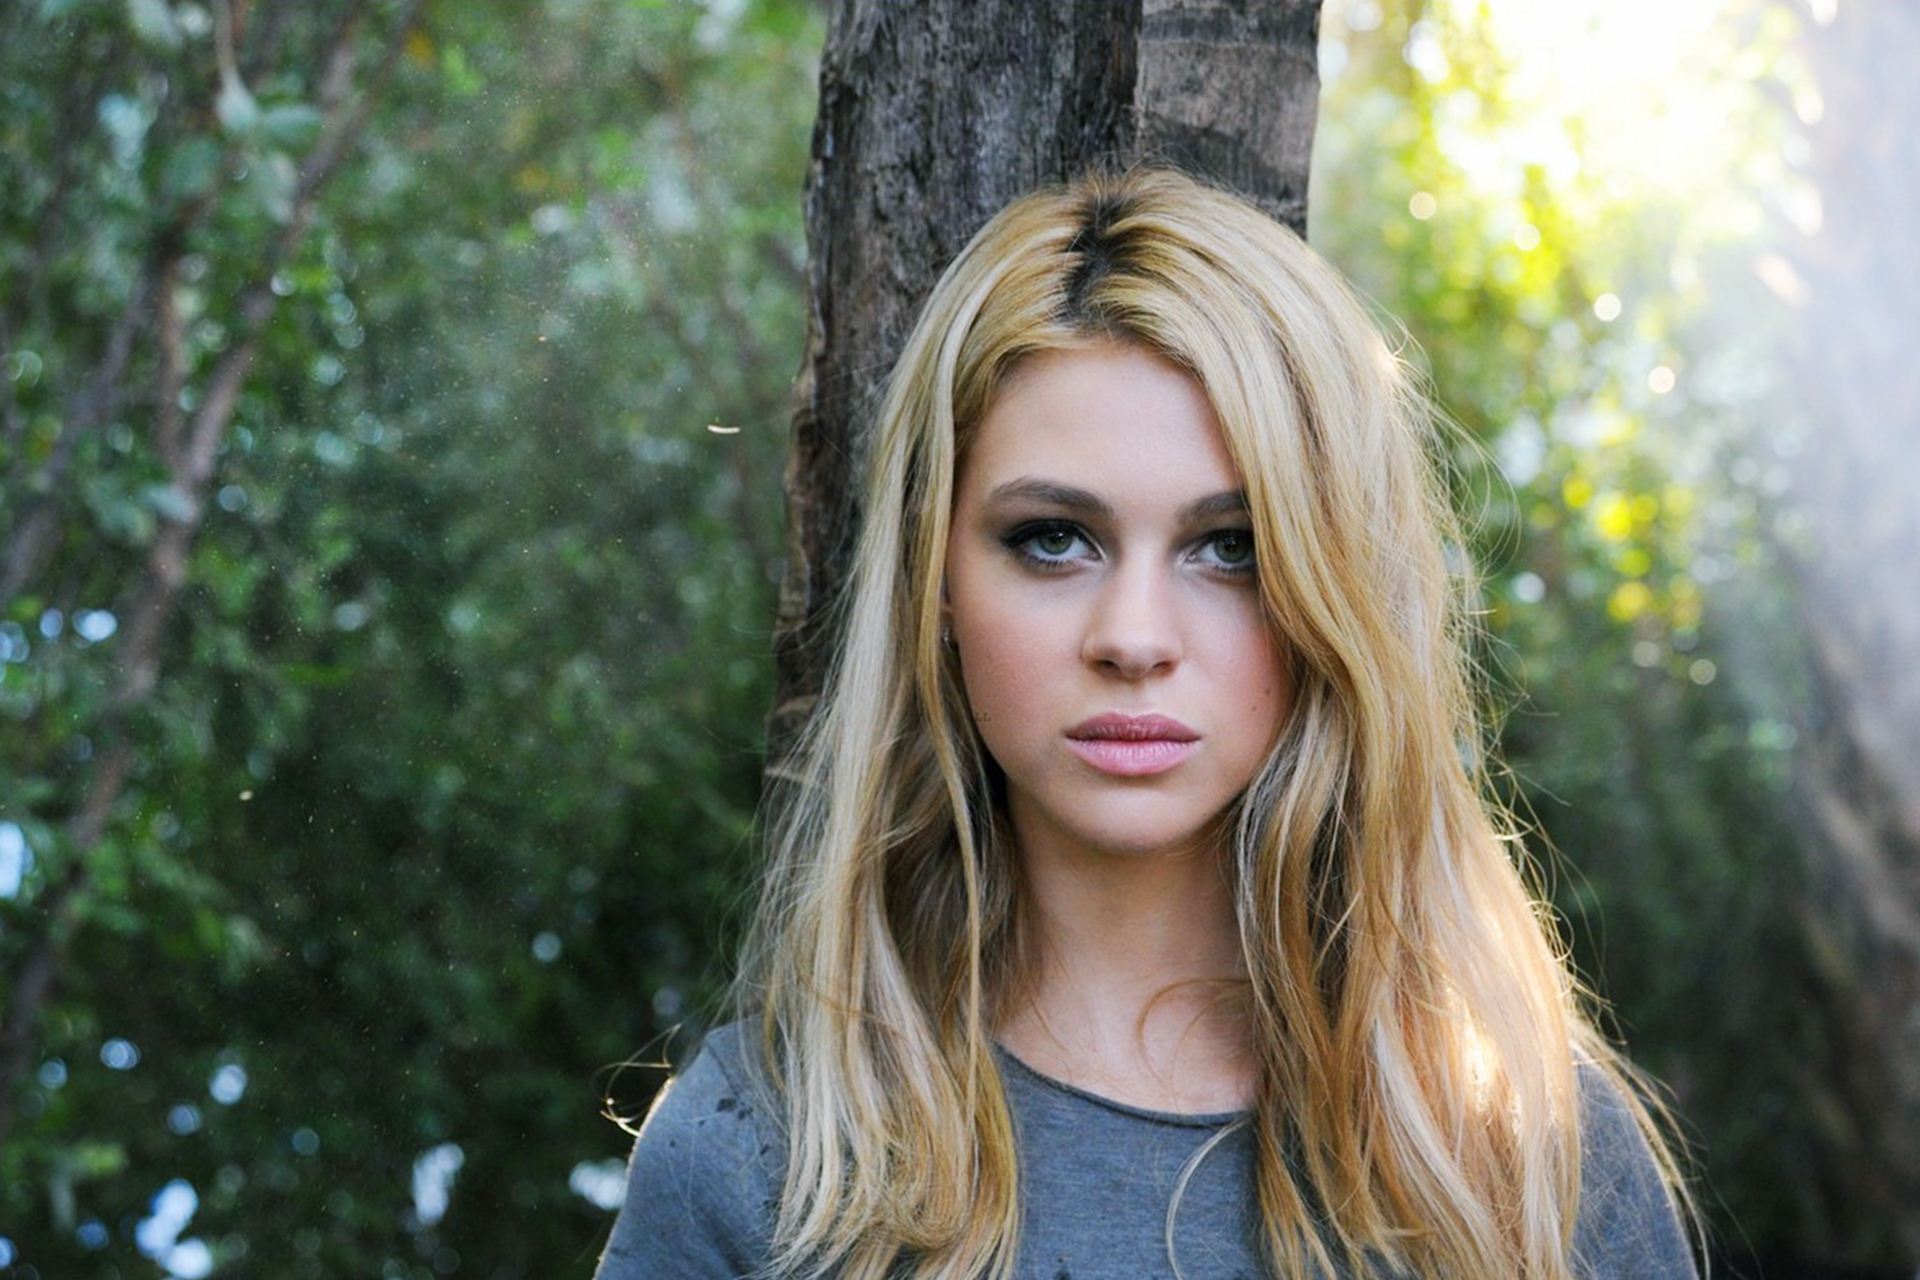 Nicola Peltz Set to Write, Co-Direct, and Star in 'Lola James'